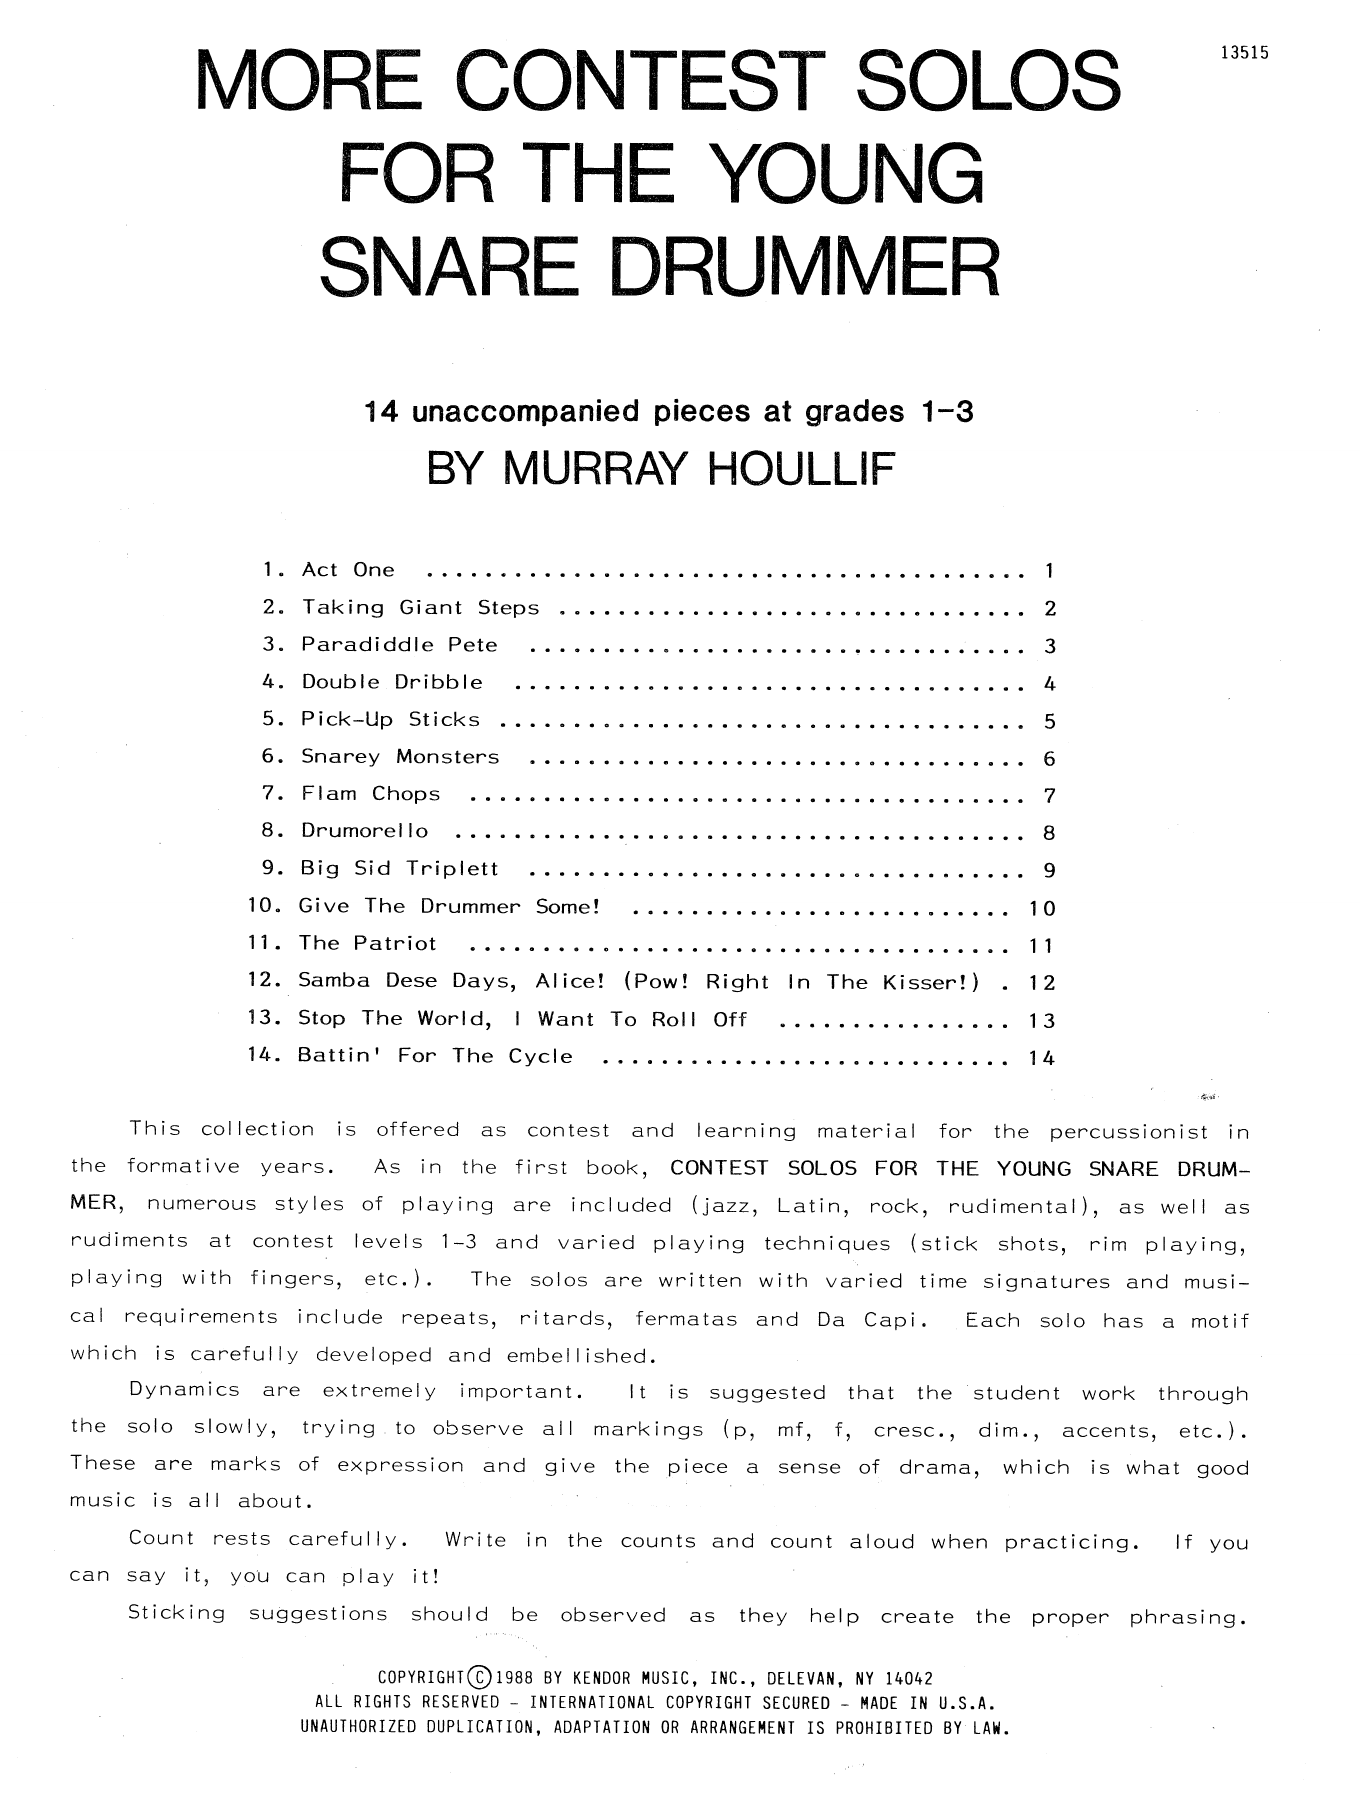 Download Murray Houllif More Contest Solos For The Young Snare Sheet Music